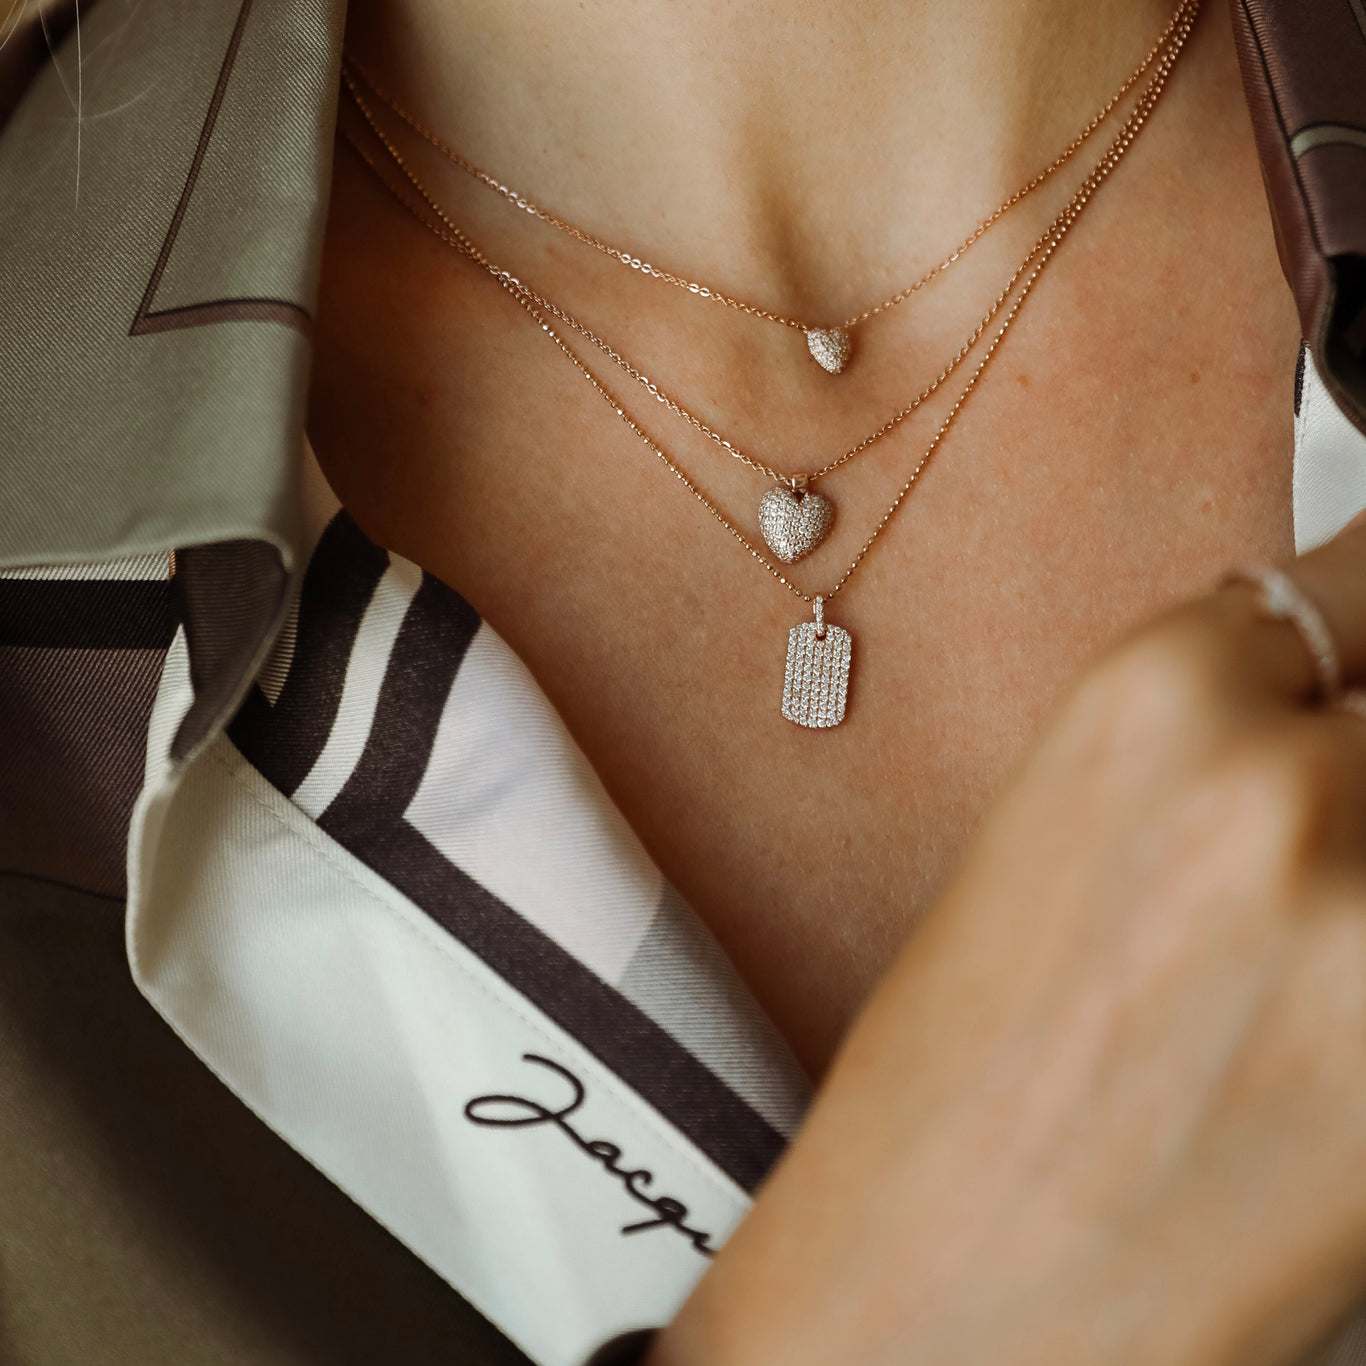 Diamond Dogtag shown layered underneath the Sweetheart Necklace and the Mini Sweetheart Necklace